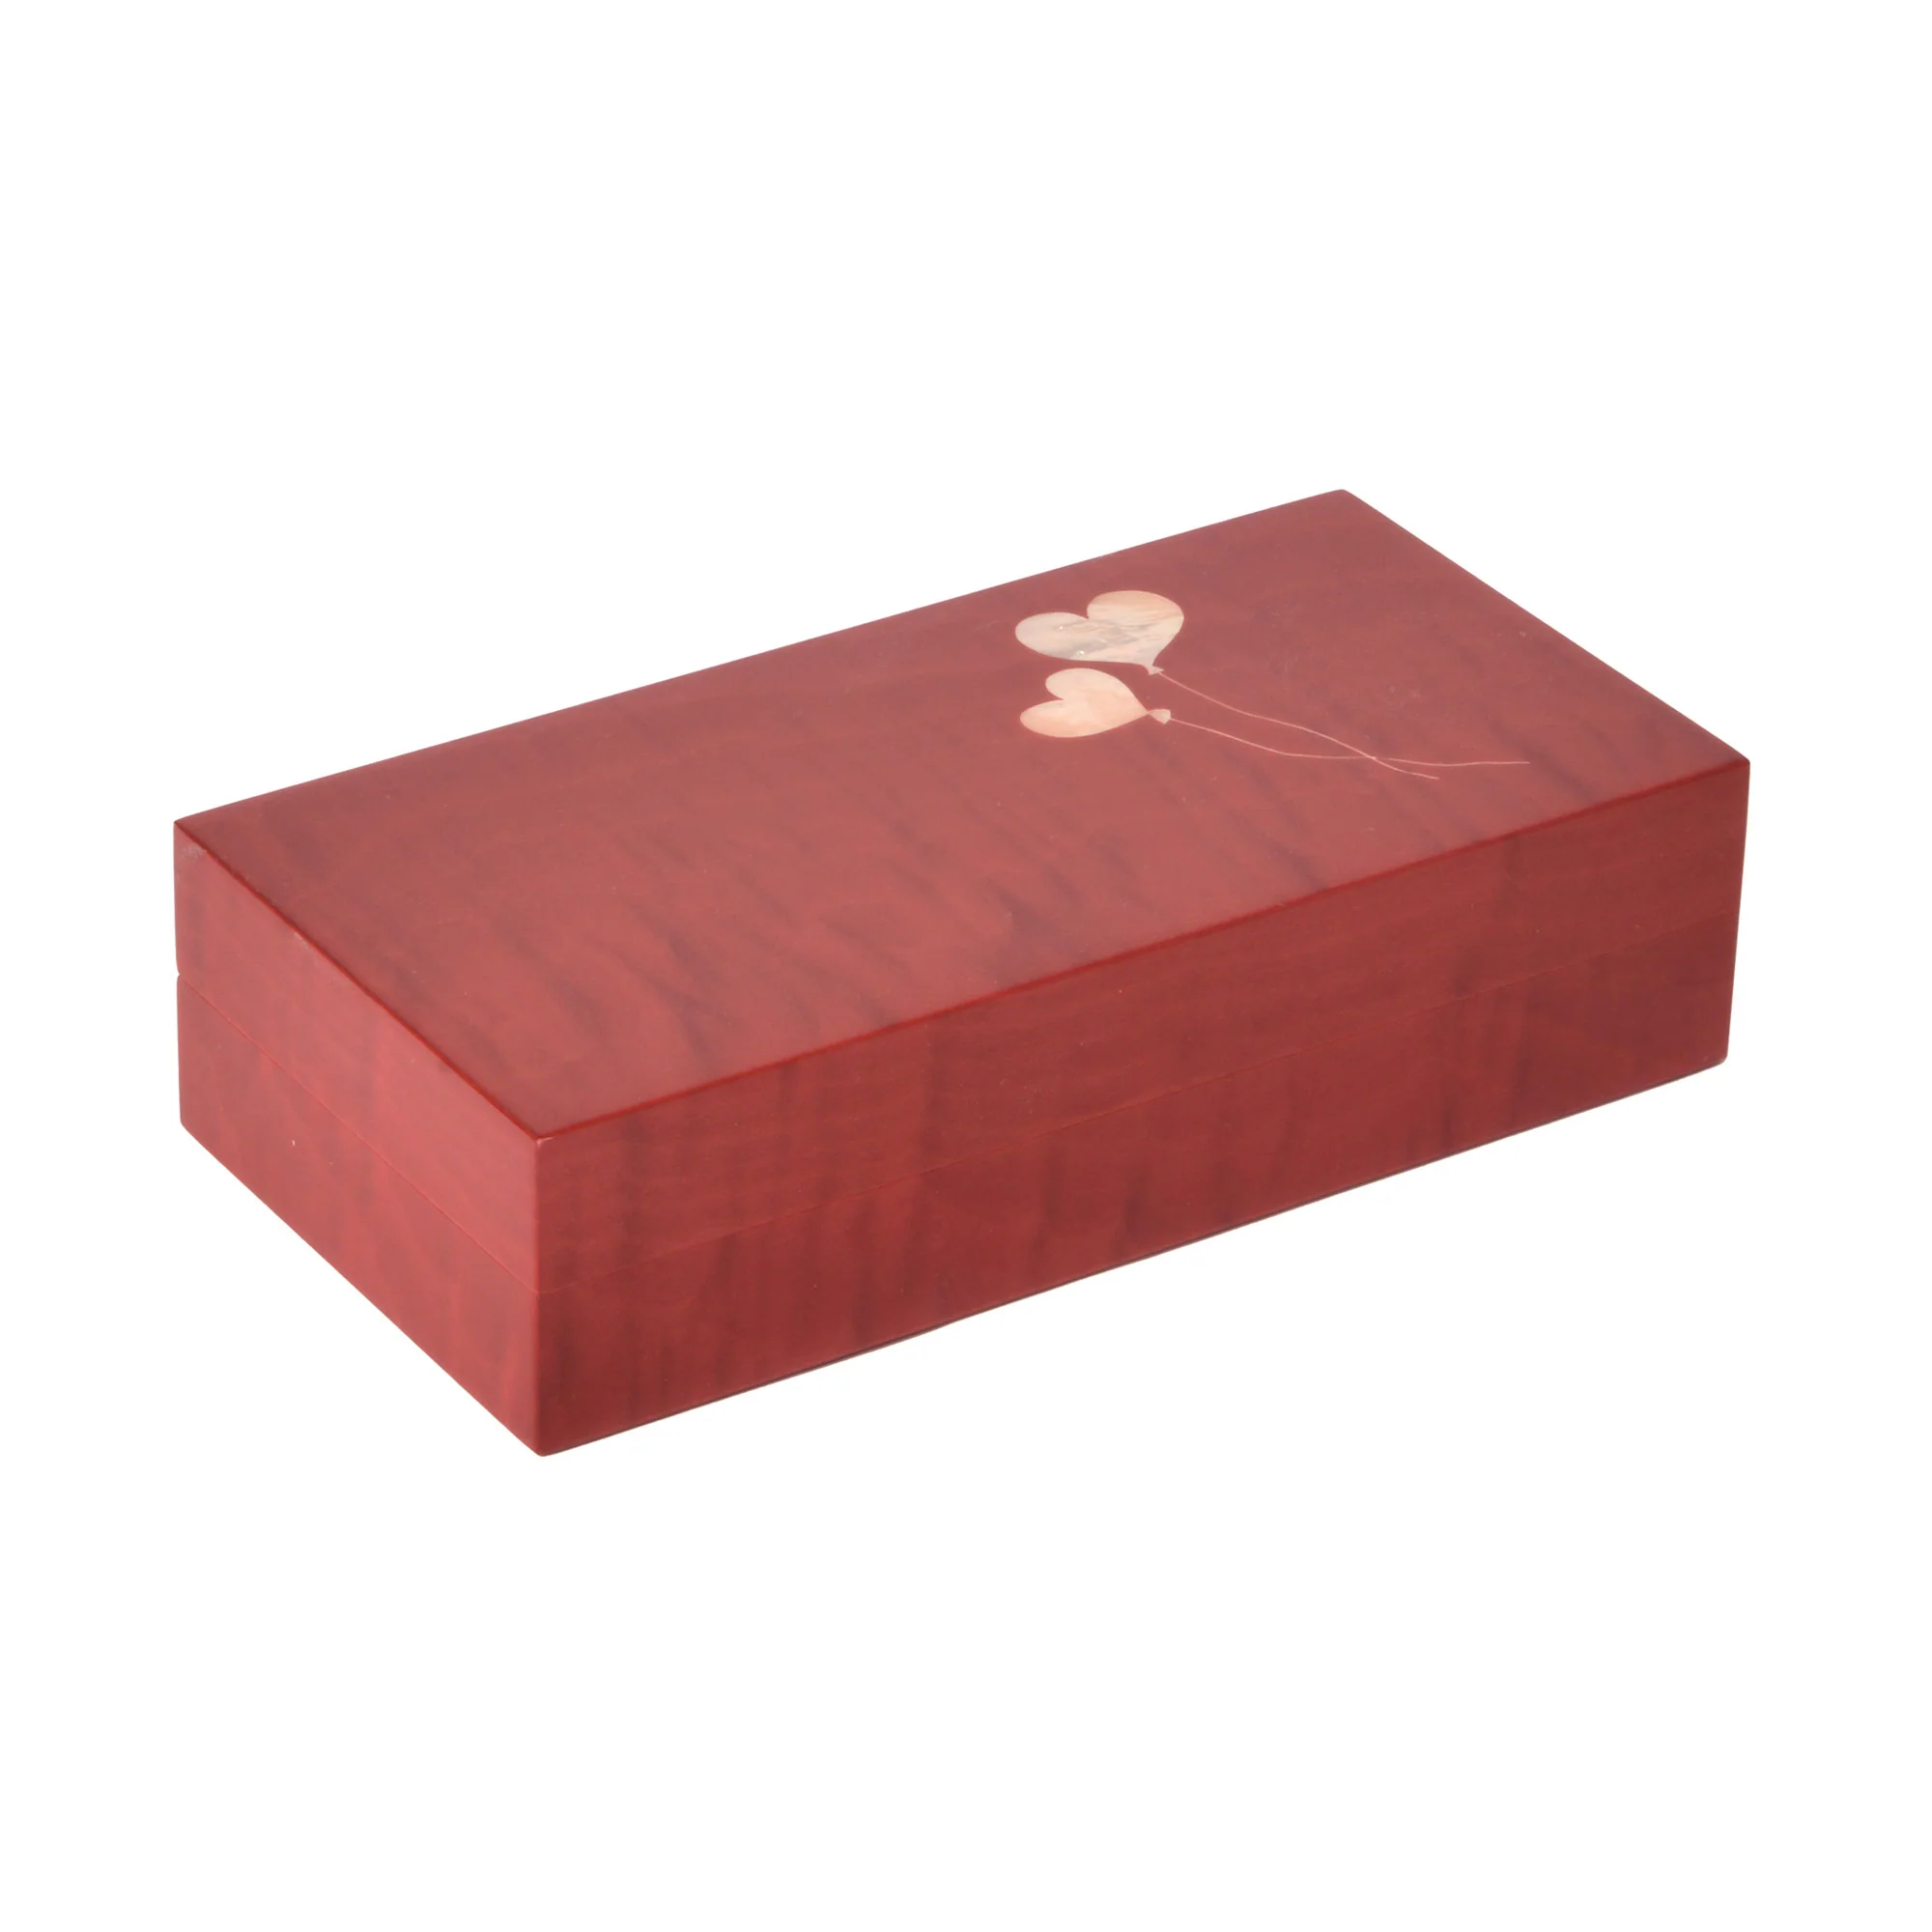 "Fruit" - Box for 8 rings or 8 pairs of cufflinks